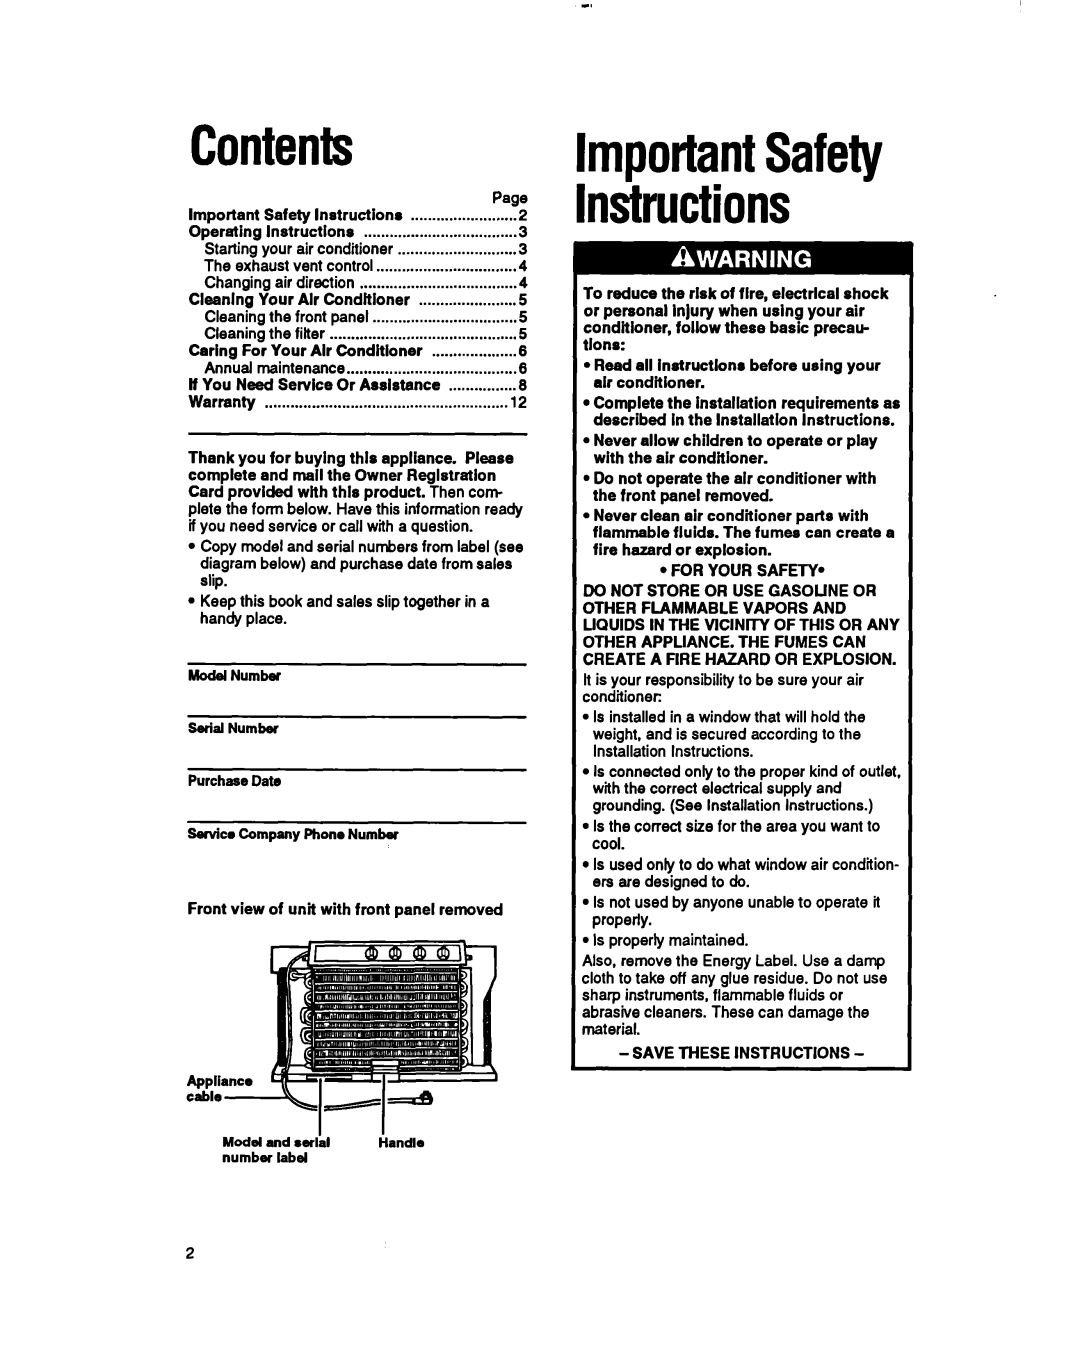 Whirlpool RH123A1 manual Contents, importantSafety Instructions 